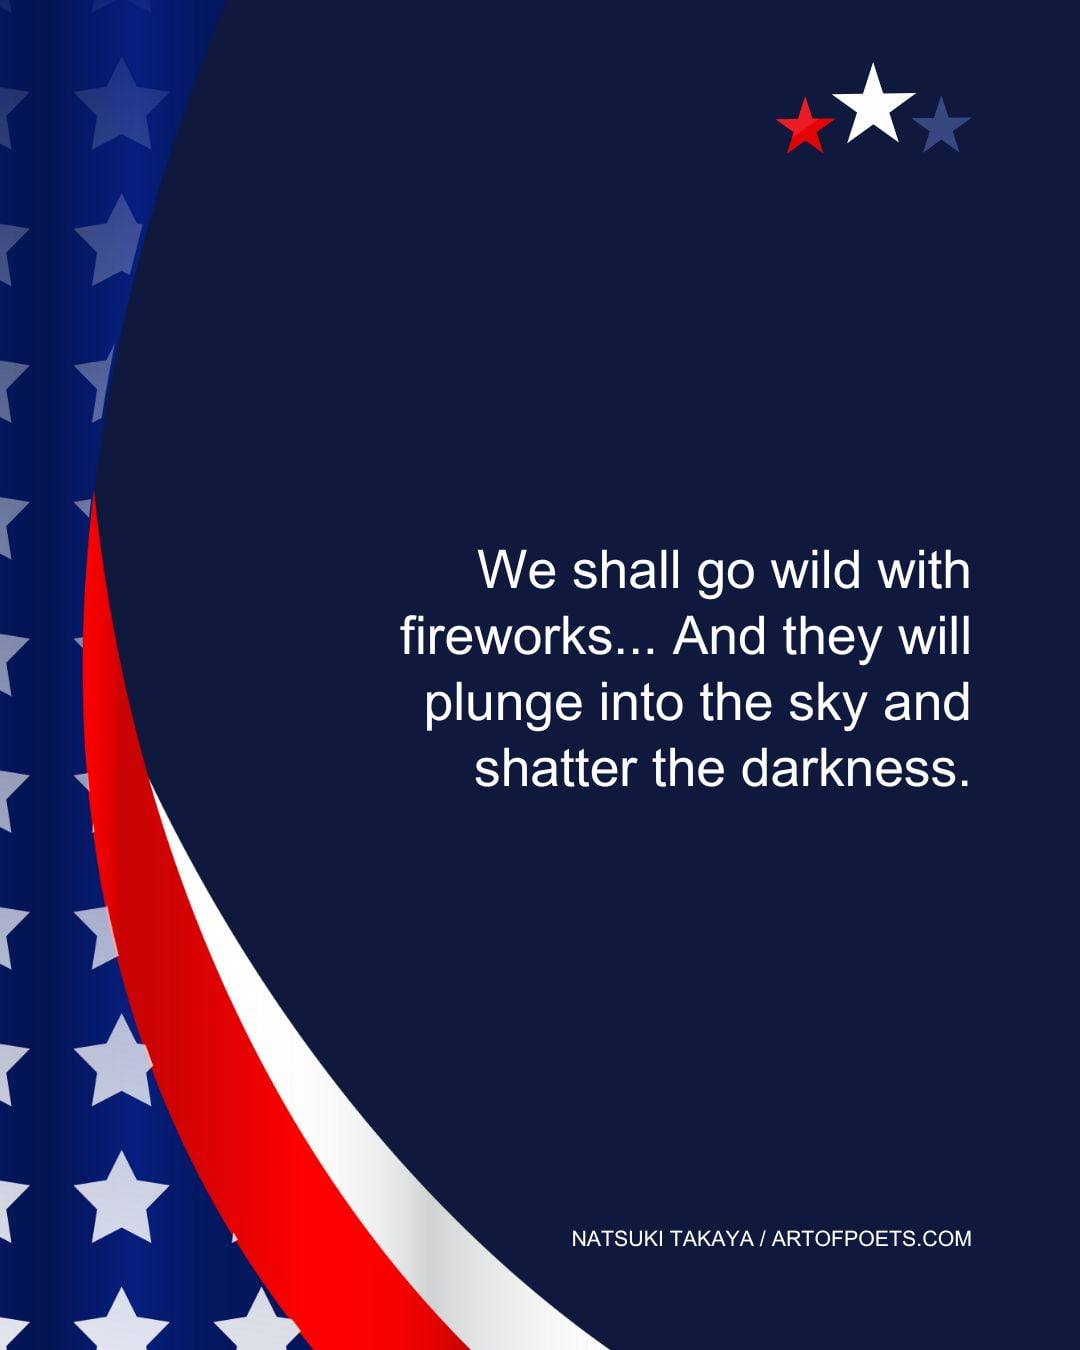 We shall go wild with fireworks. And they will plunge into the sky and shatter the darkness